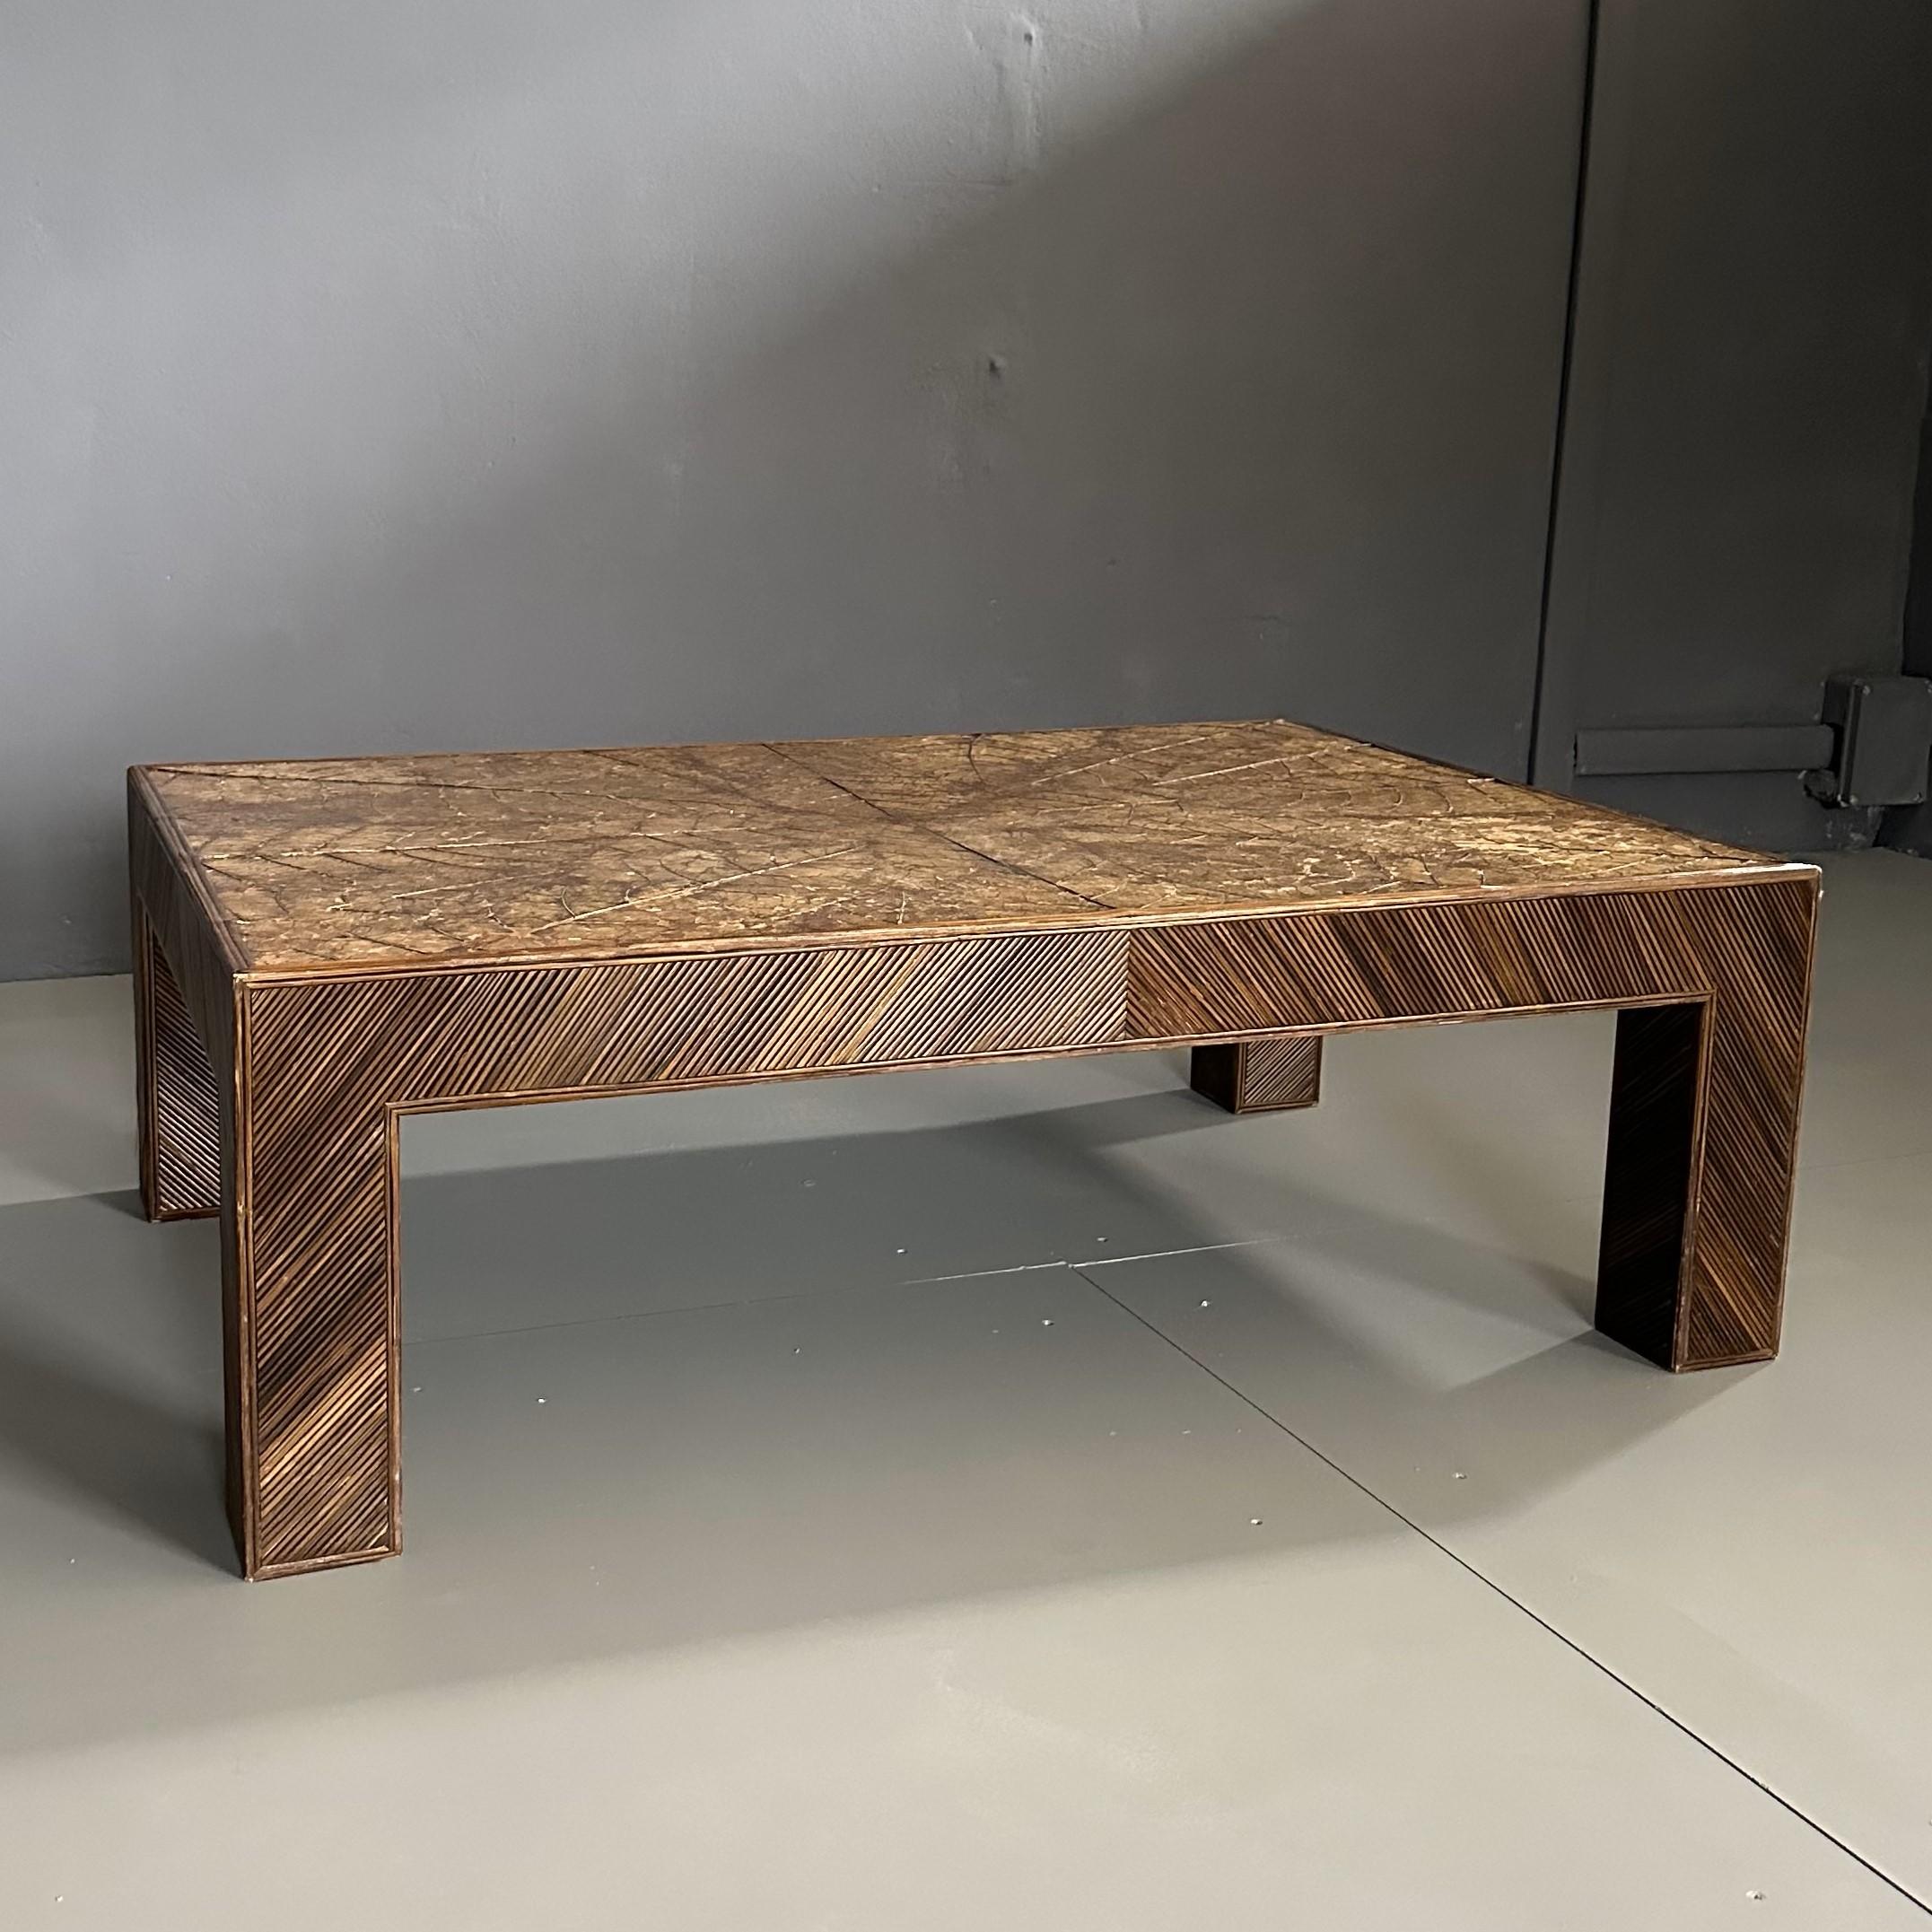 70s coffee table, in bamboo with tobacco leaf top by Arpex International.
The coffee table has beautiful bamboo finishes with a tobacco leaf on the top.
The rectangular-shaped coffee table along the profile has particular finishes